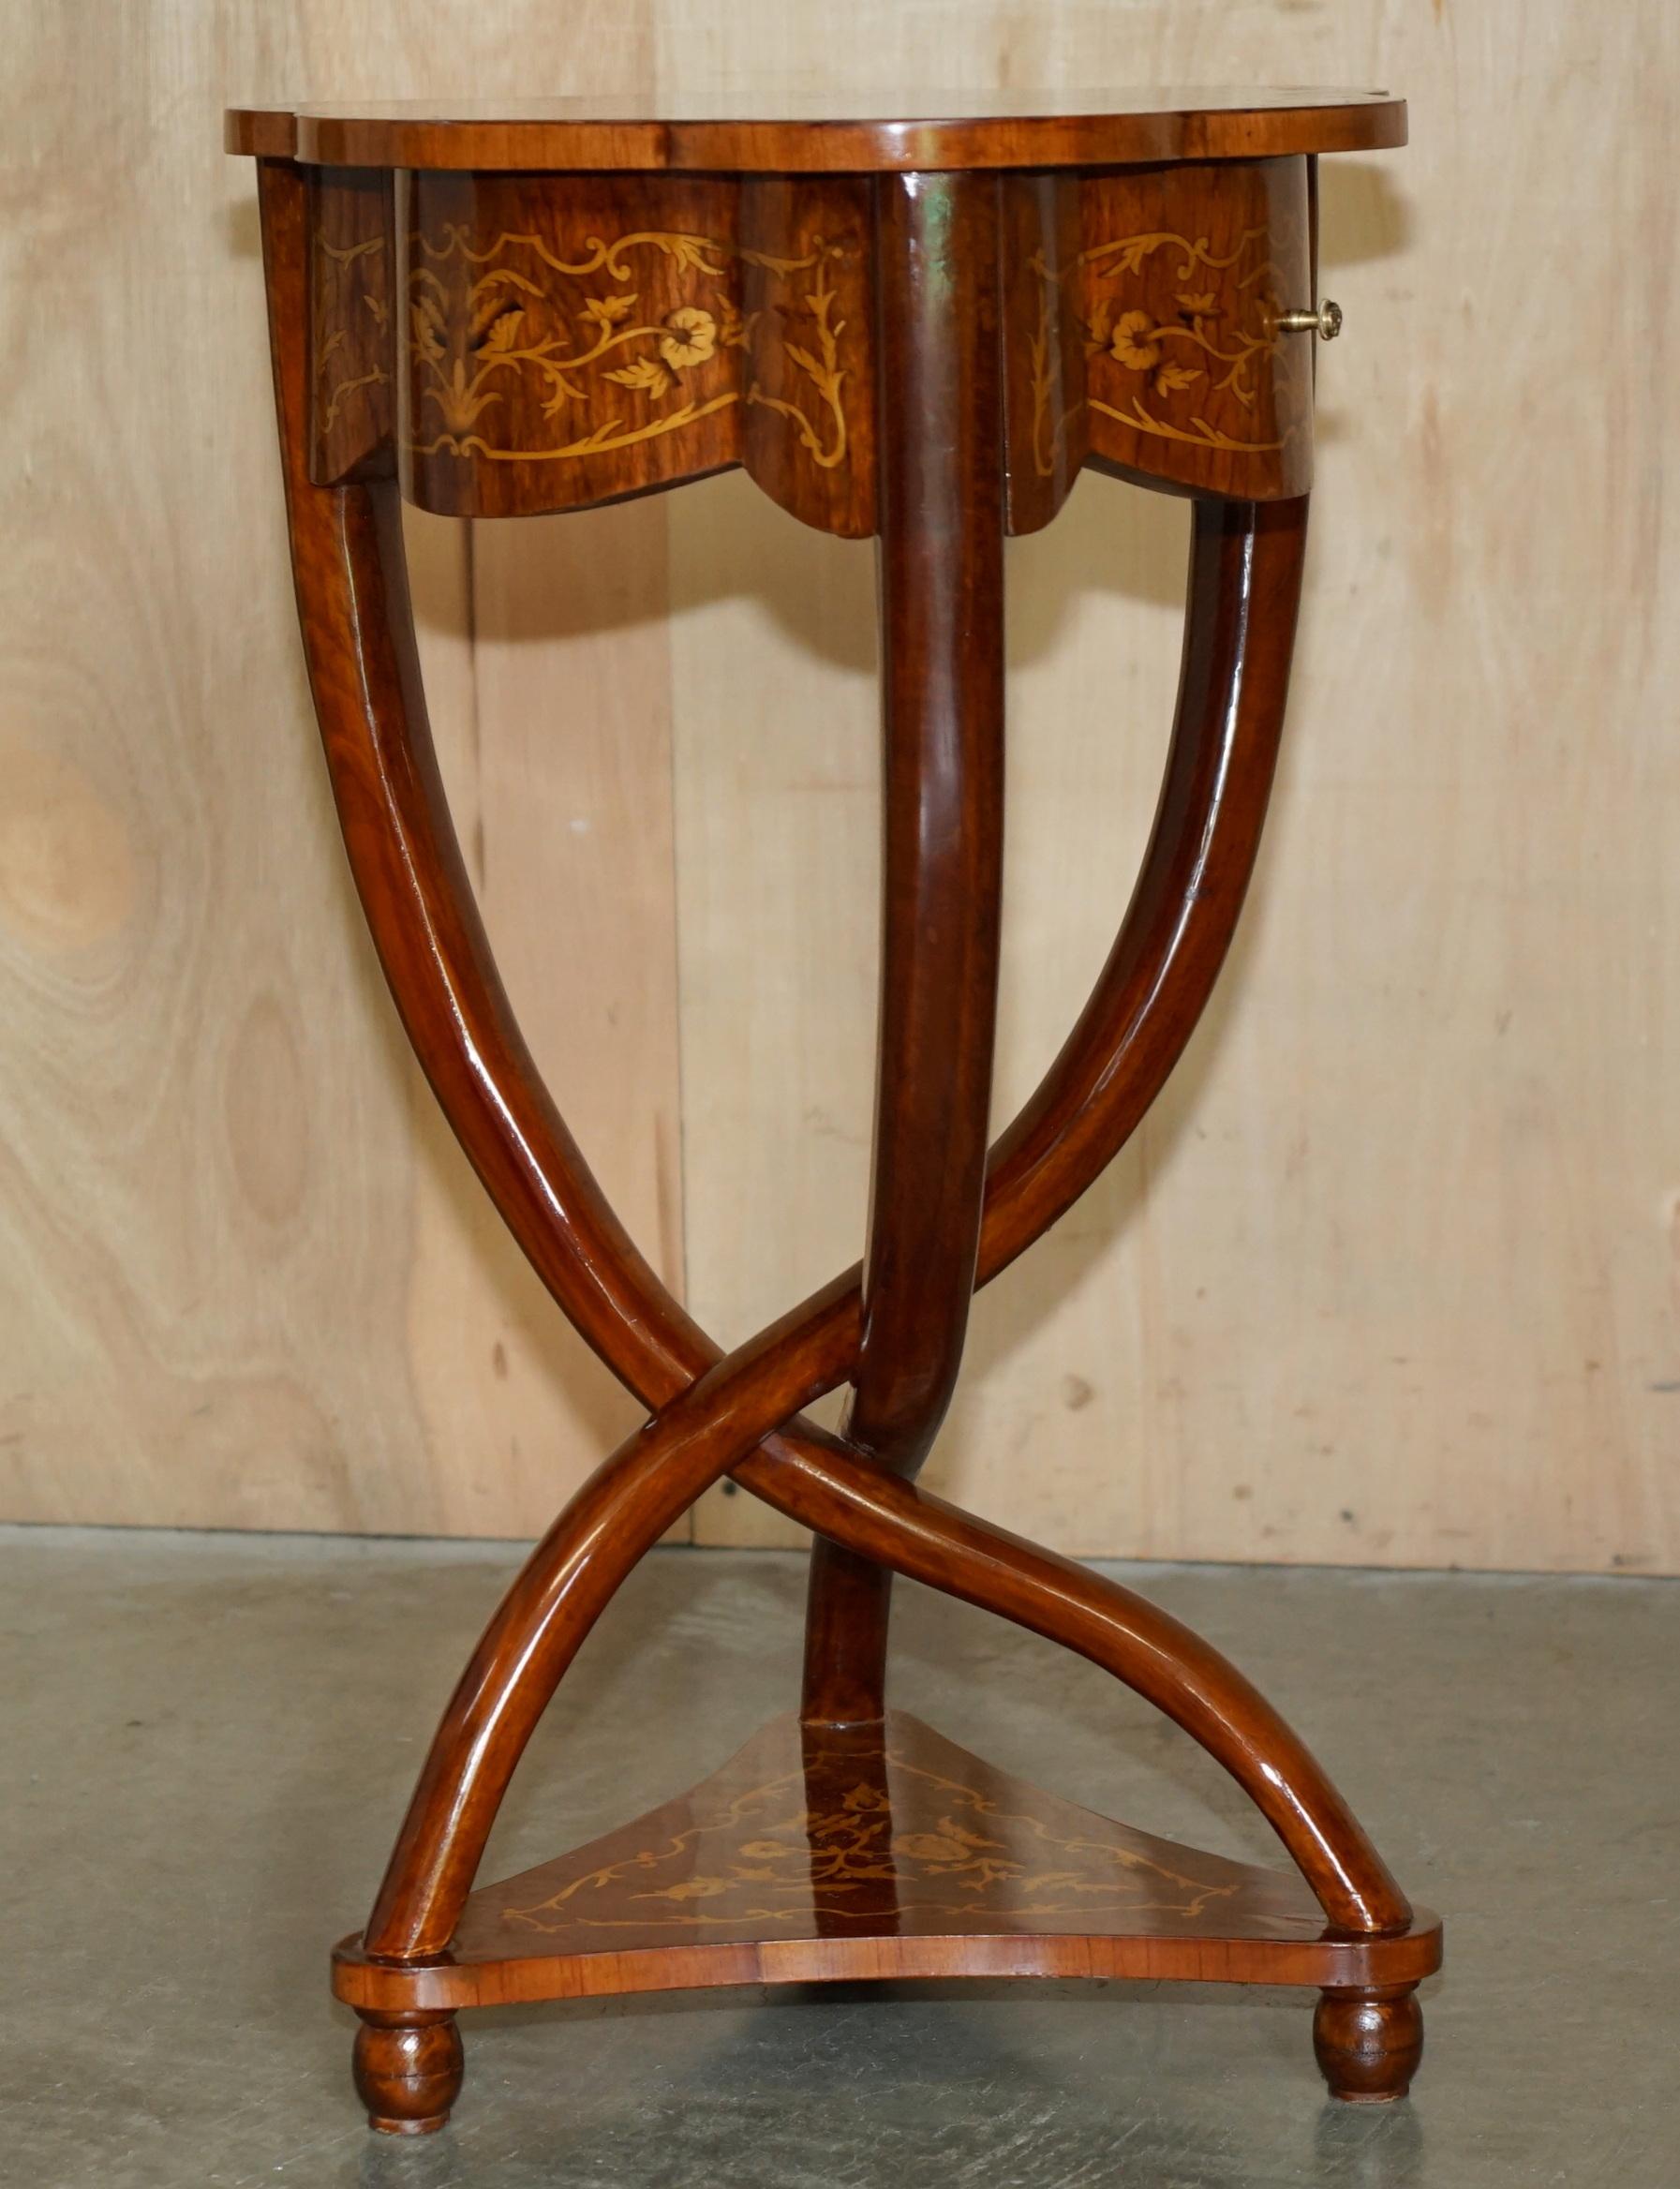 PAIR OF ART DECO STYLE SYCAMORE WOOD & WALNUT INLAID PEDESTAL SIDE END TABLEs For Sale 5